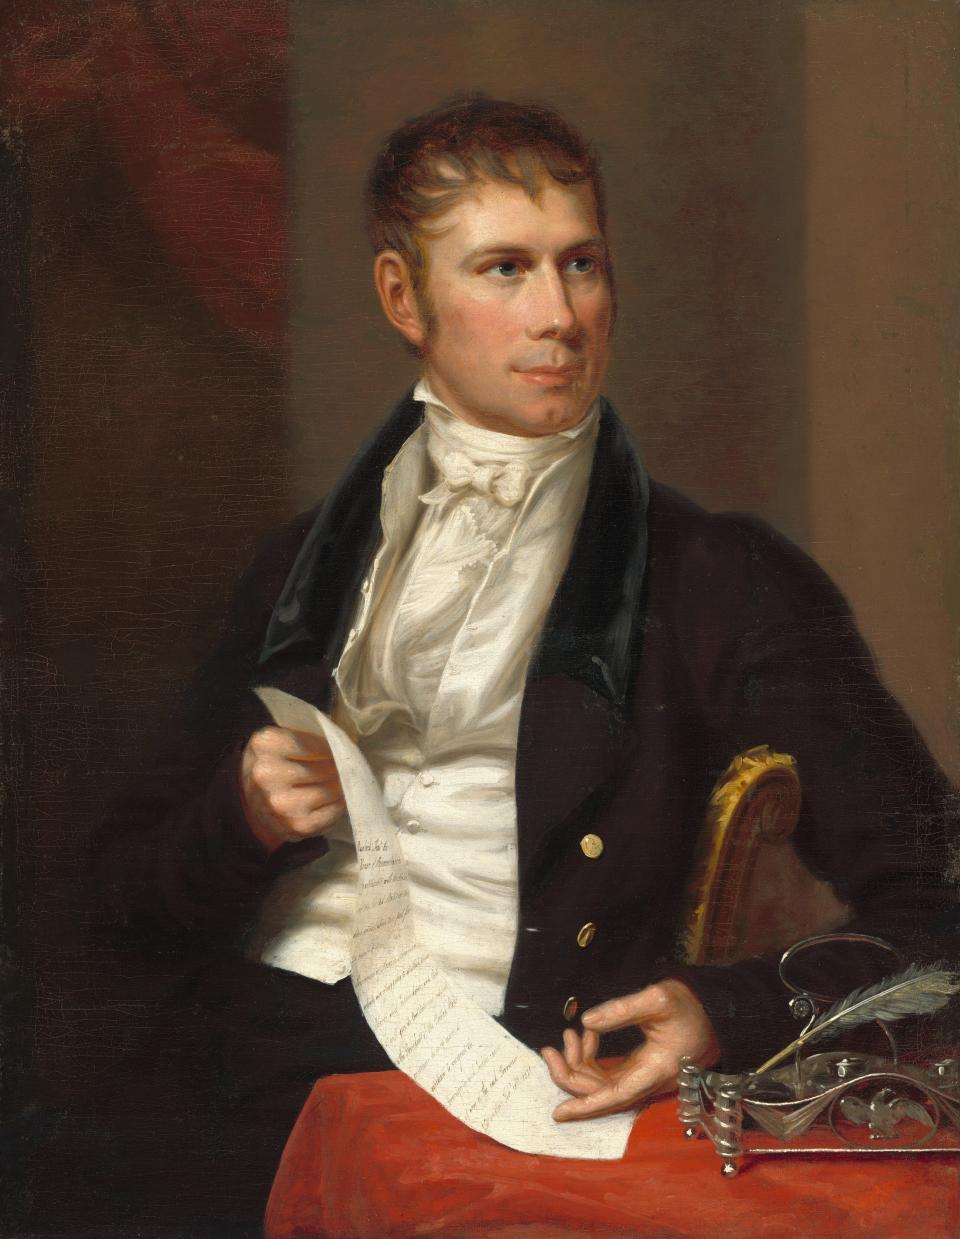 Henry Clay as shown in 1821